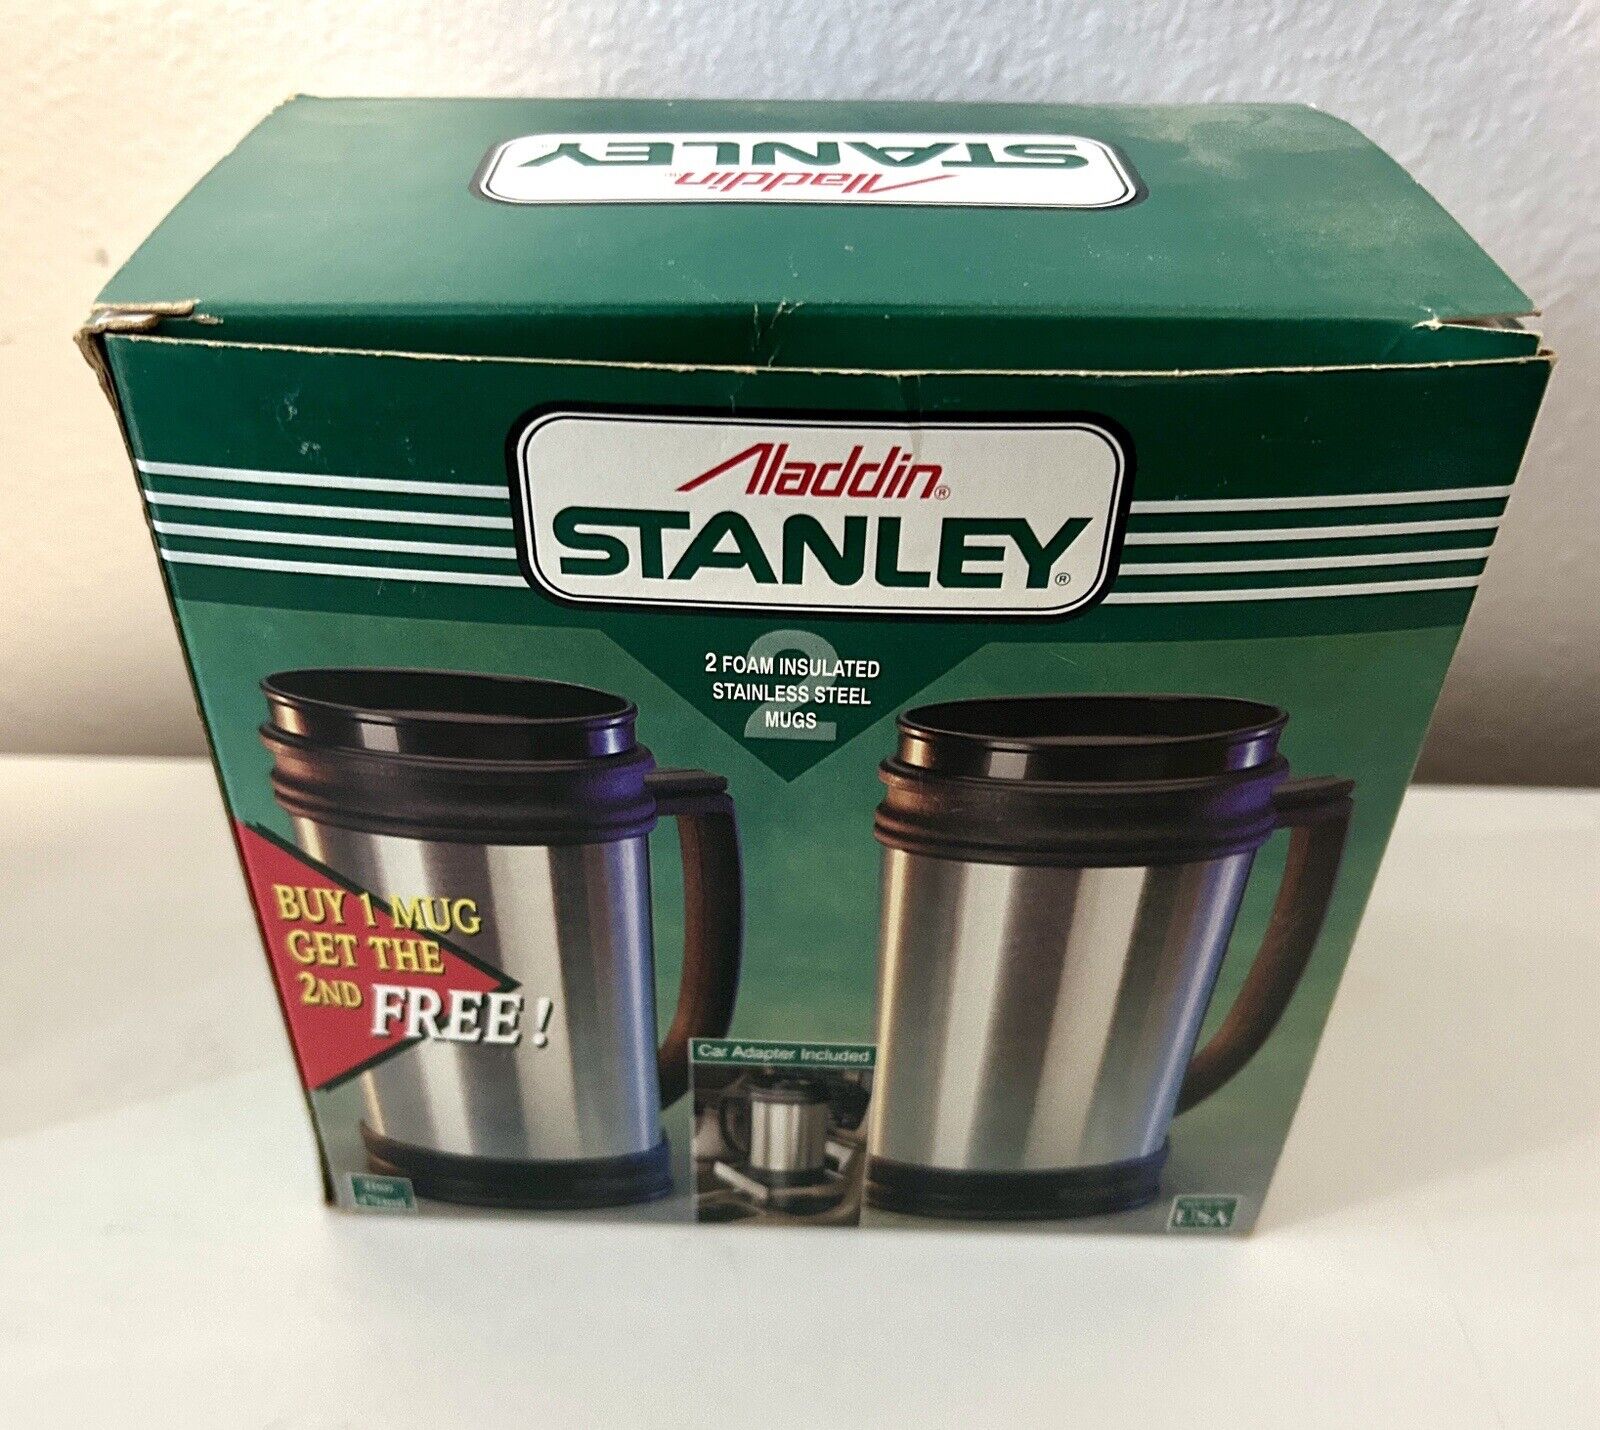 Vintage Aladdin Stanley Stainless Steel Insulated Mugs 2 Pack New in Box